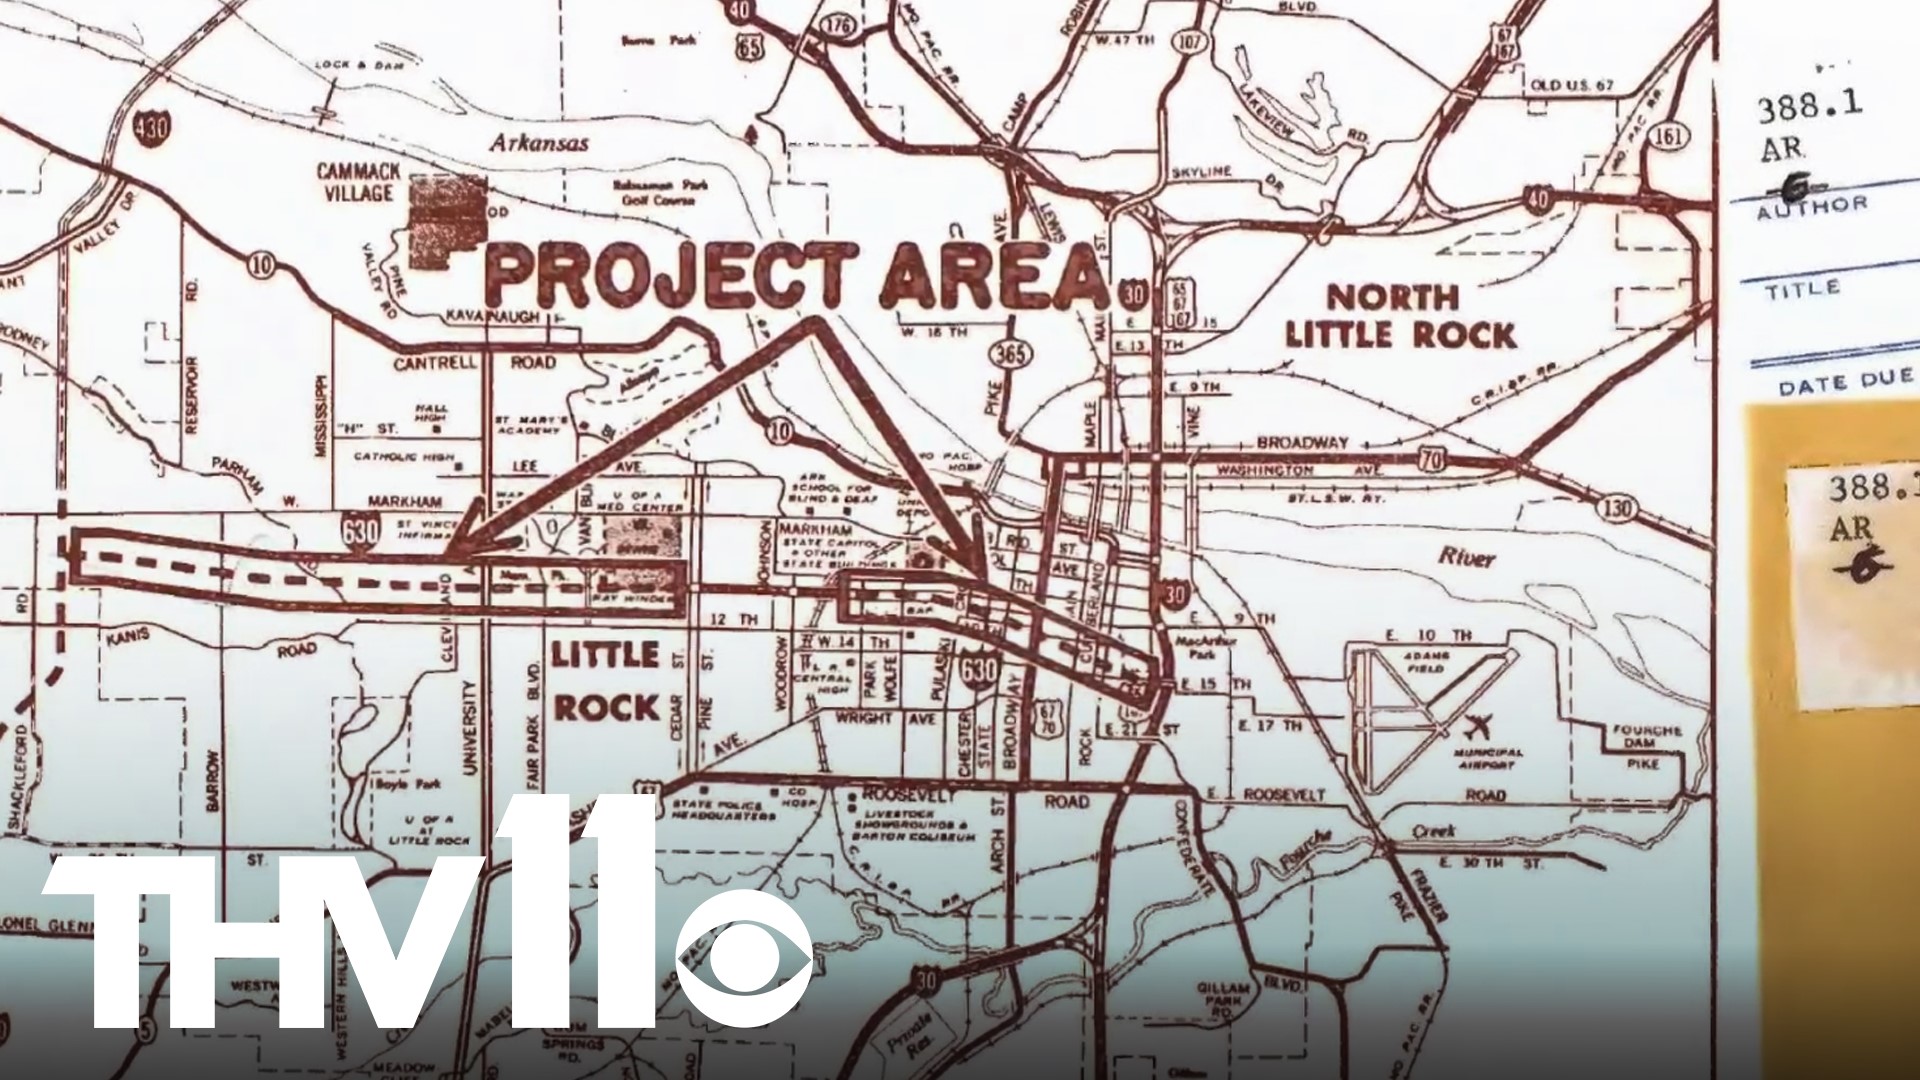 Many use I-630 as part of their daily commute— we sat down with one LR historian who shows us the Black History that was lost as a result of building the interstate.